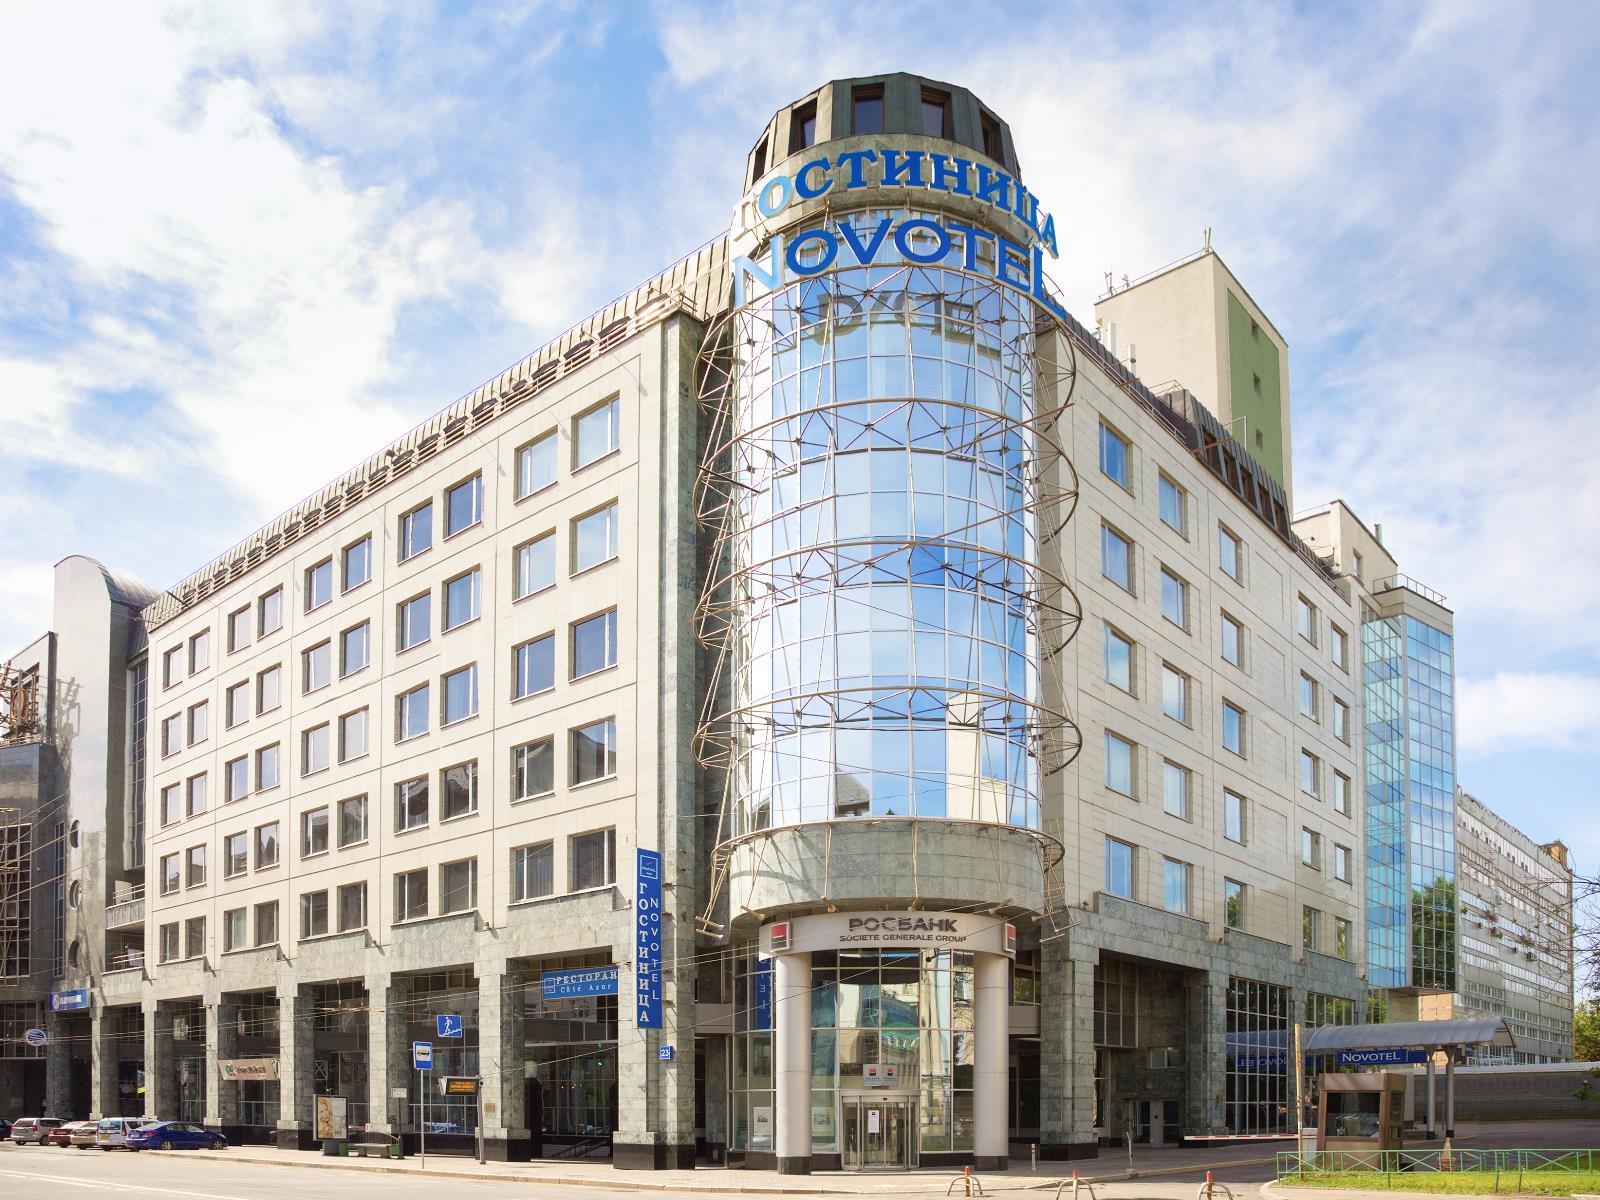 Novotel Moscow Centre Hotel Booking,Novotel Moscow Centre Hotel Resort,Novotel Moscow Centre Hotel reservation,Novotel Moscow Centre Hotel deals,Novotel Moscow Centre Hotel Phone Number,Novotel Moscow Centre Hotel website,Novotel Moscow Centre Hotel E-mail,Novotel Moscow Centre Hotel address,Novotel Moscow Centre Hotel Overview,Rooms & Rates,Novotel Moscow Centre Hotel Photos,Novotel Moscow Centre Hotel Location Amenities,Novotel Moscow Centre Hotel Q&A,Novotel Moscow Centre Hotel Map,Novotel Moscow Centre Hotel Gallery,Novotel Moscow Centre Hotel Russia 2016, Russia Novotel Moscow Centre Hotel room types 2016, Russia Novotel Moscow Centre Hotel price 2016, Novotel Moscow Centre Hotel in Russia 2016, Russia Novotel Moscow Centre Hotel address, Novotel Moscow Centre Hotel Russia booking online, Russia Novotel Moscow Centre Hotel travel services, Russia Novotel Moscow Centre Hotel pick up services.